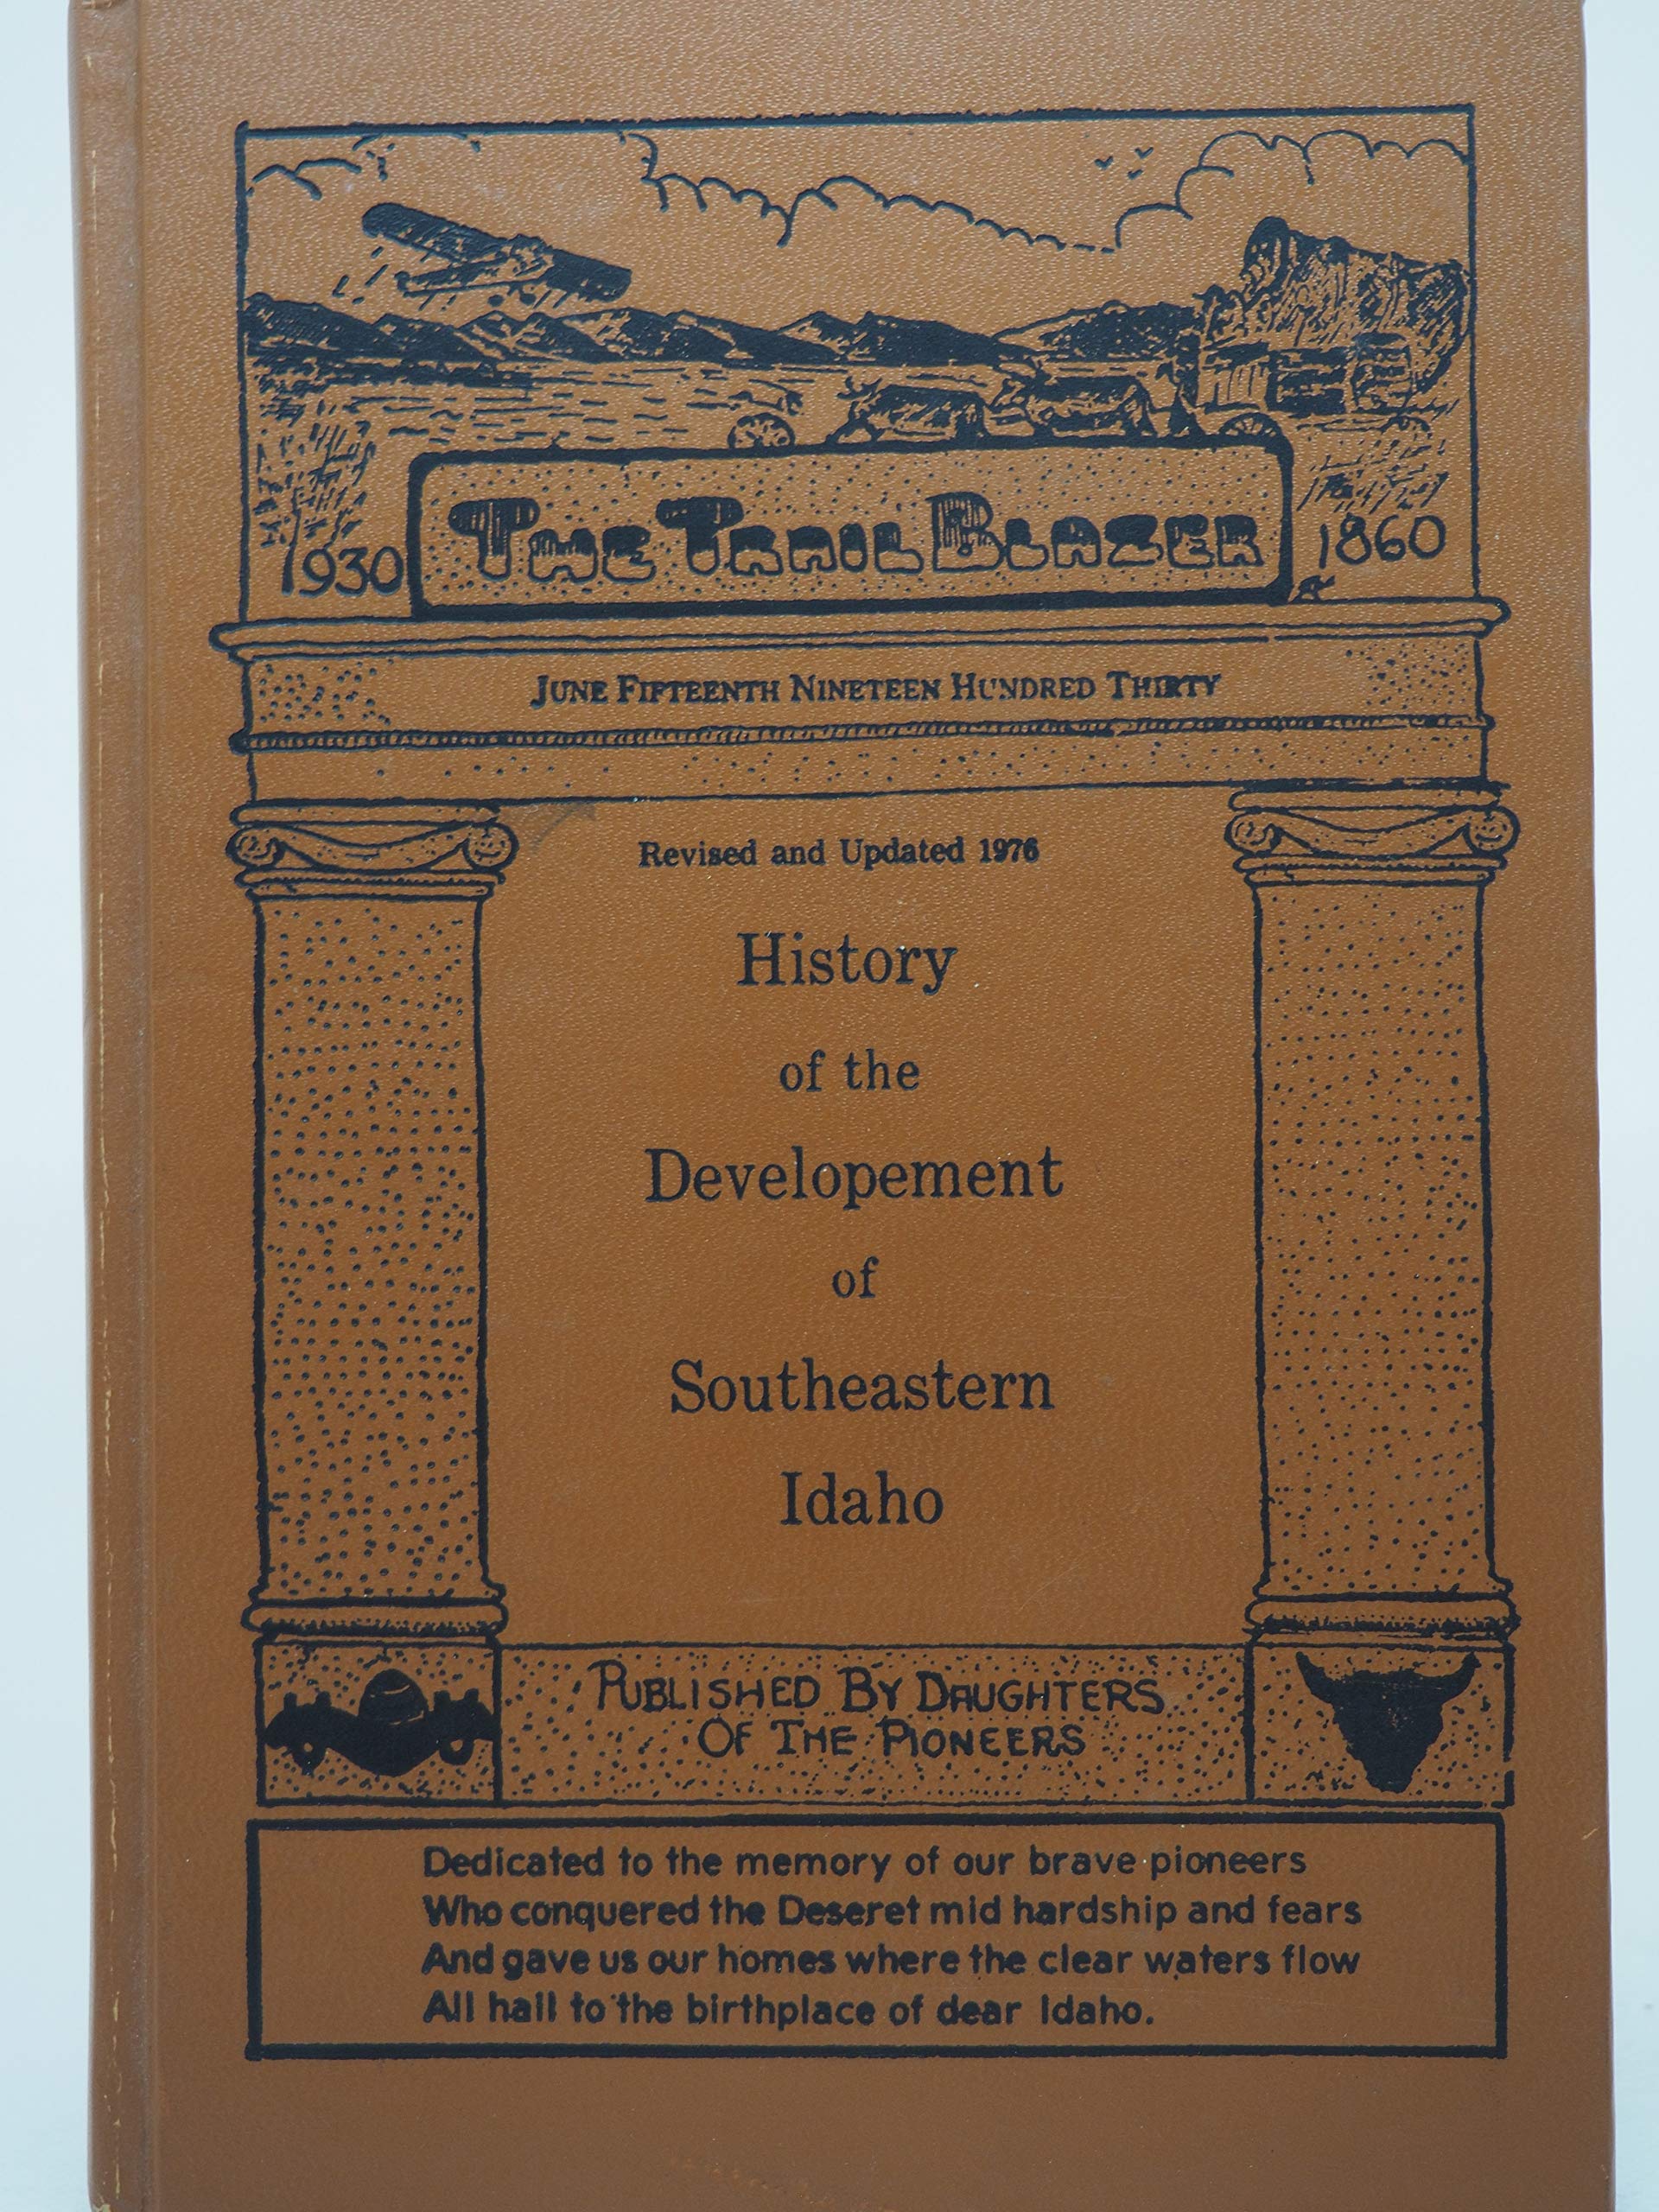 The trail blazer: History of the development of southeastern Idaho (book cover)